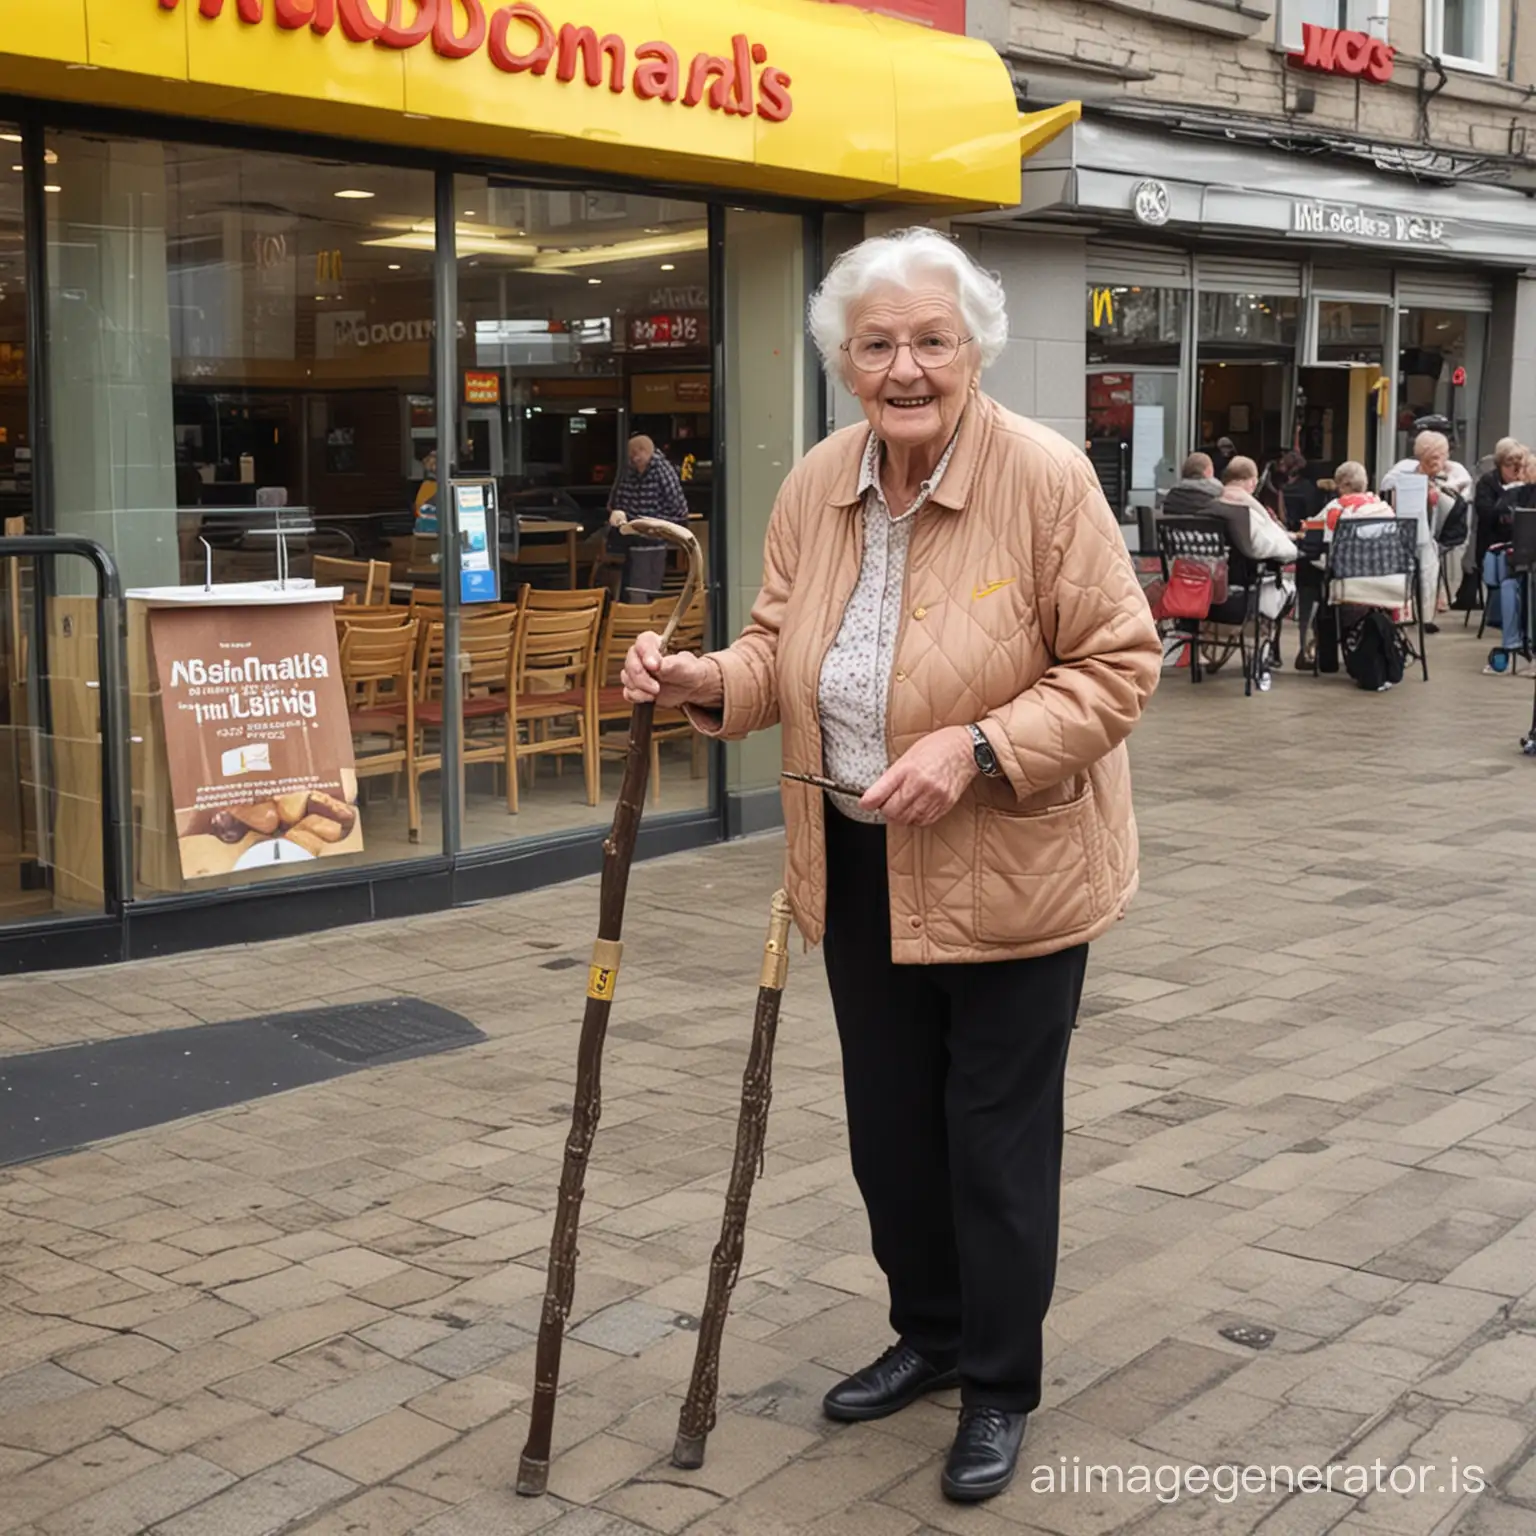 Elderly-Woman-with-Cane-at-McDonalds-Entrance